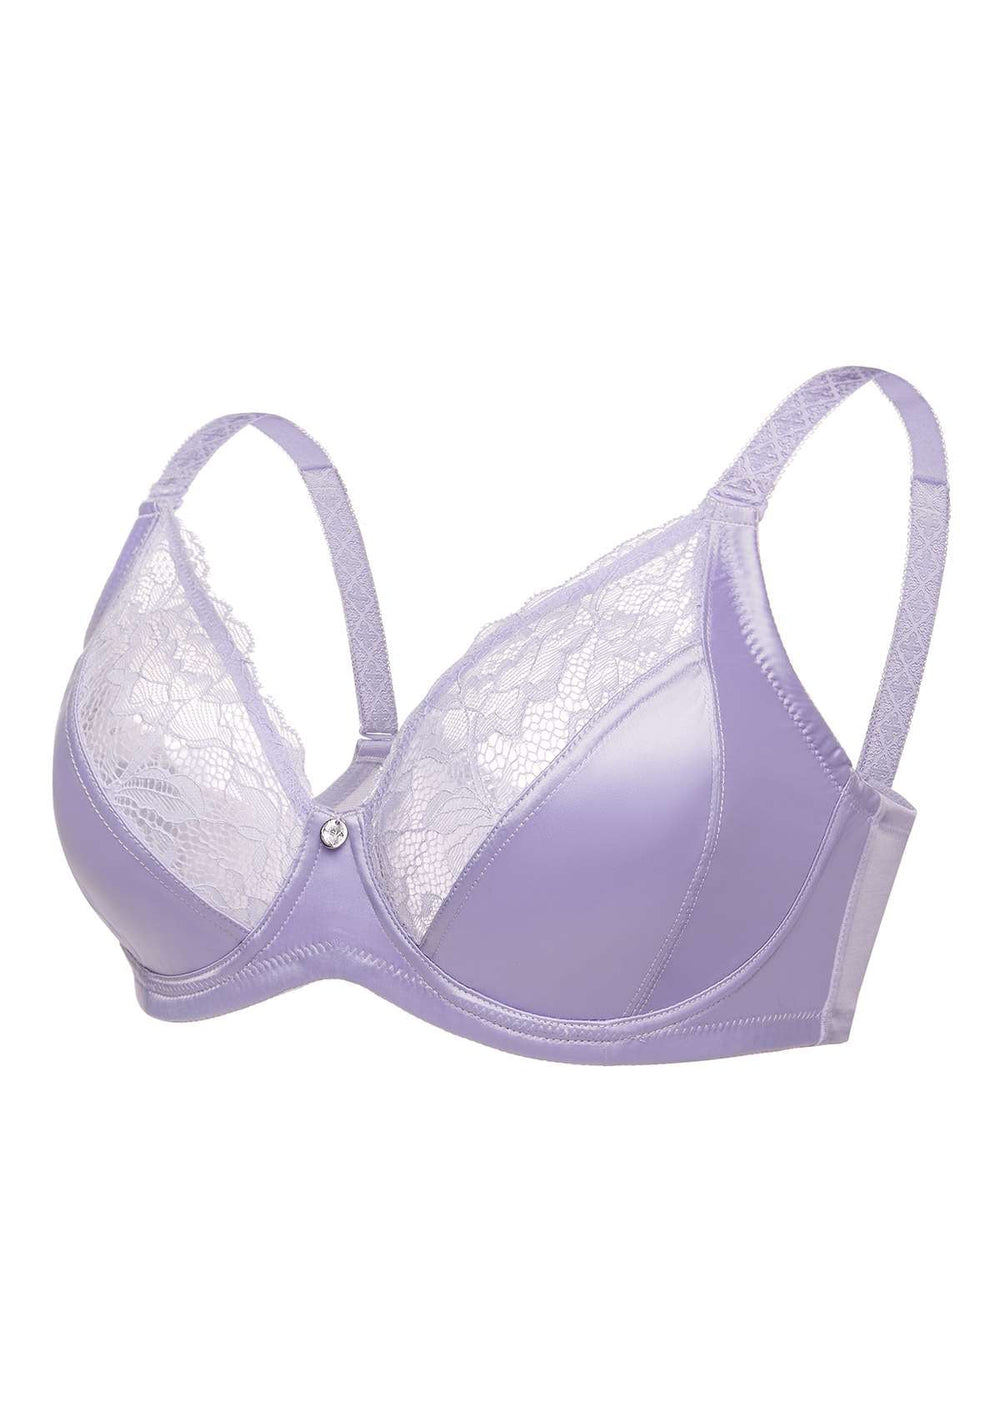 Purple flower-embroidered supportive plunging underwire full cup